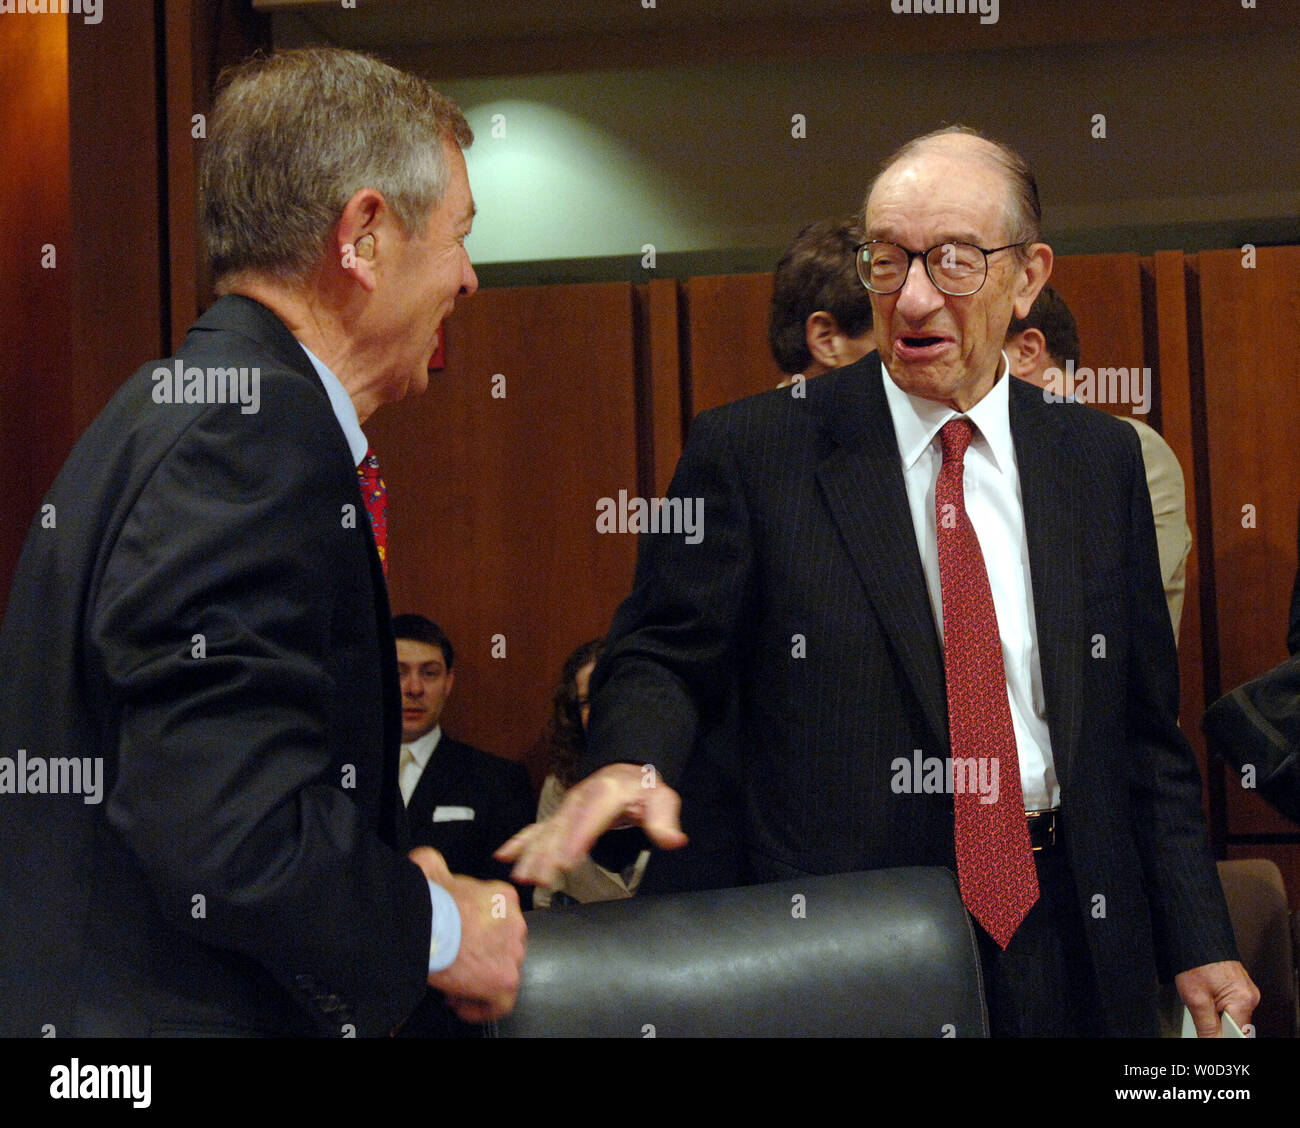 Former Federal Reserve Board Chairman Alan Greenspan greets Sen. George Voinovich, R-OH, prior to testifying before the Senate Foreign Relations Committee about the economic risks of oil dependence during a hearing on Capitol Hill in Washington on June 7, 2006.   (UPI Photo/Roger L. Wollenberg) Stock Photo